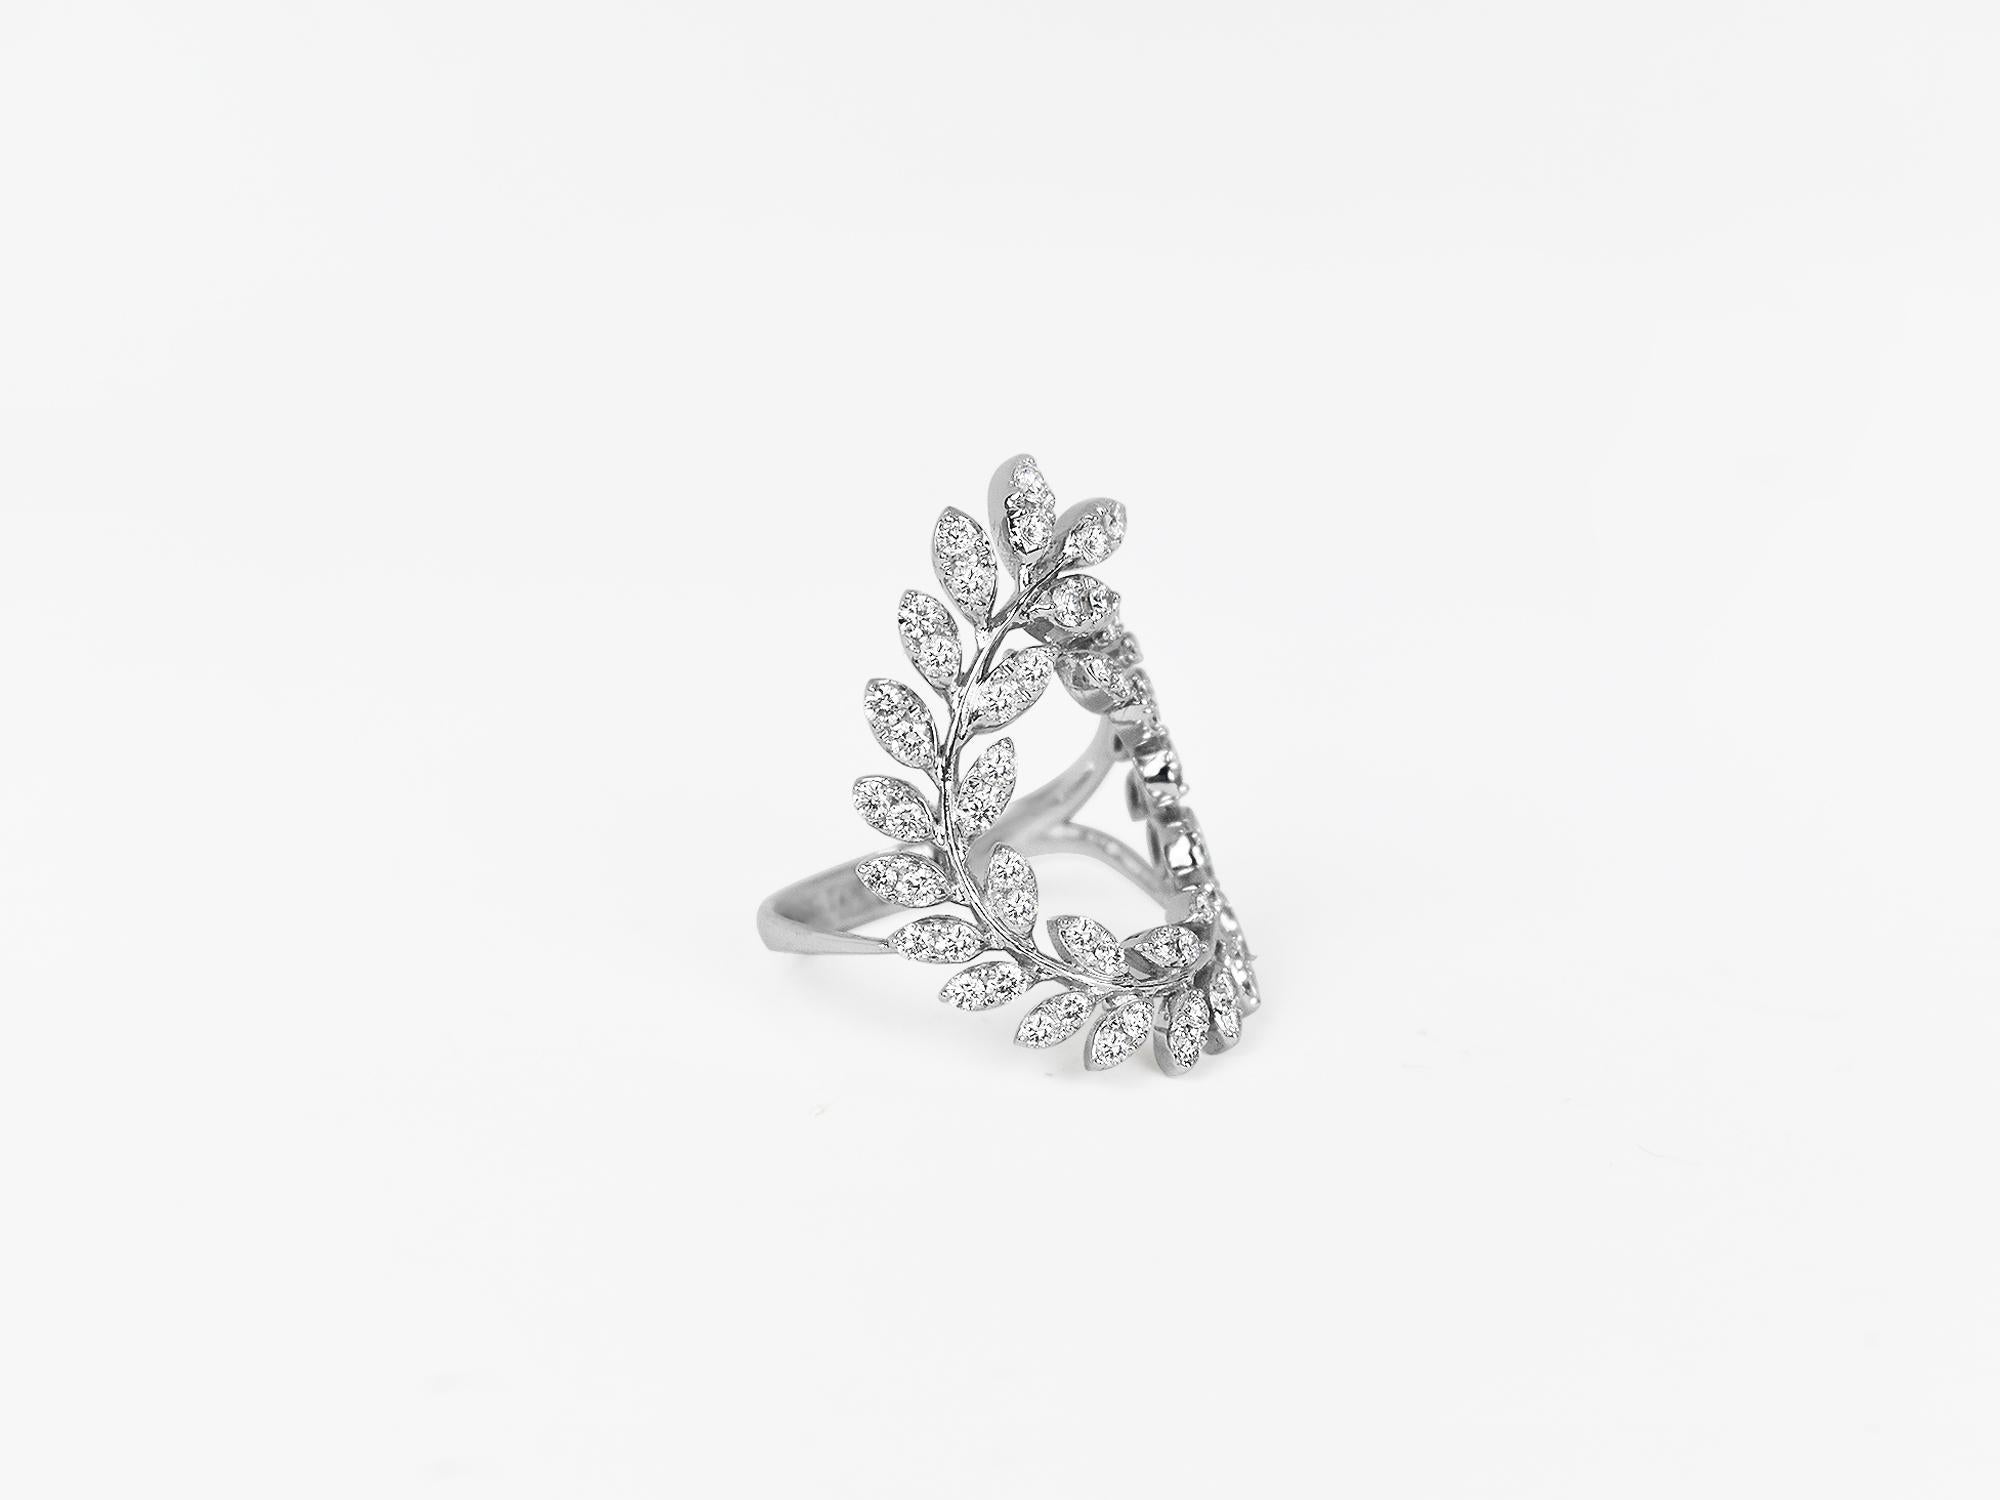 18k Ring White Gold Ring Diamond Ring  Diamond Leaves Ring Gold Fancy Ring
          This 18K solid white gold leaves circle ring is a fancy shape made of brilliant diamonds that have remarkable sophistication, depth, and brilliance.    
           